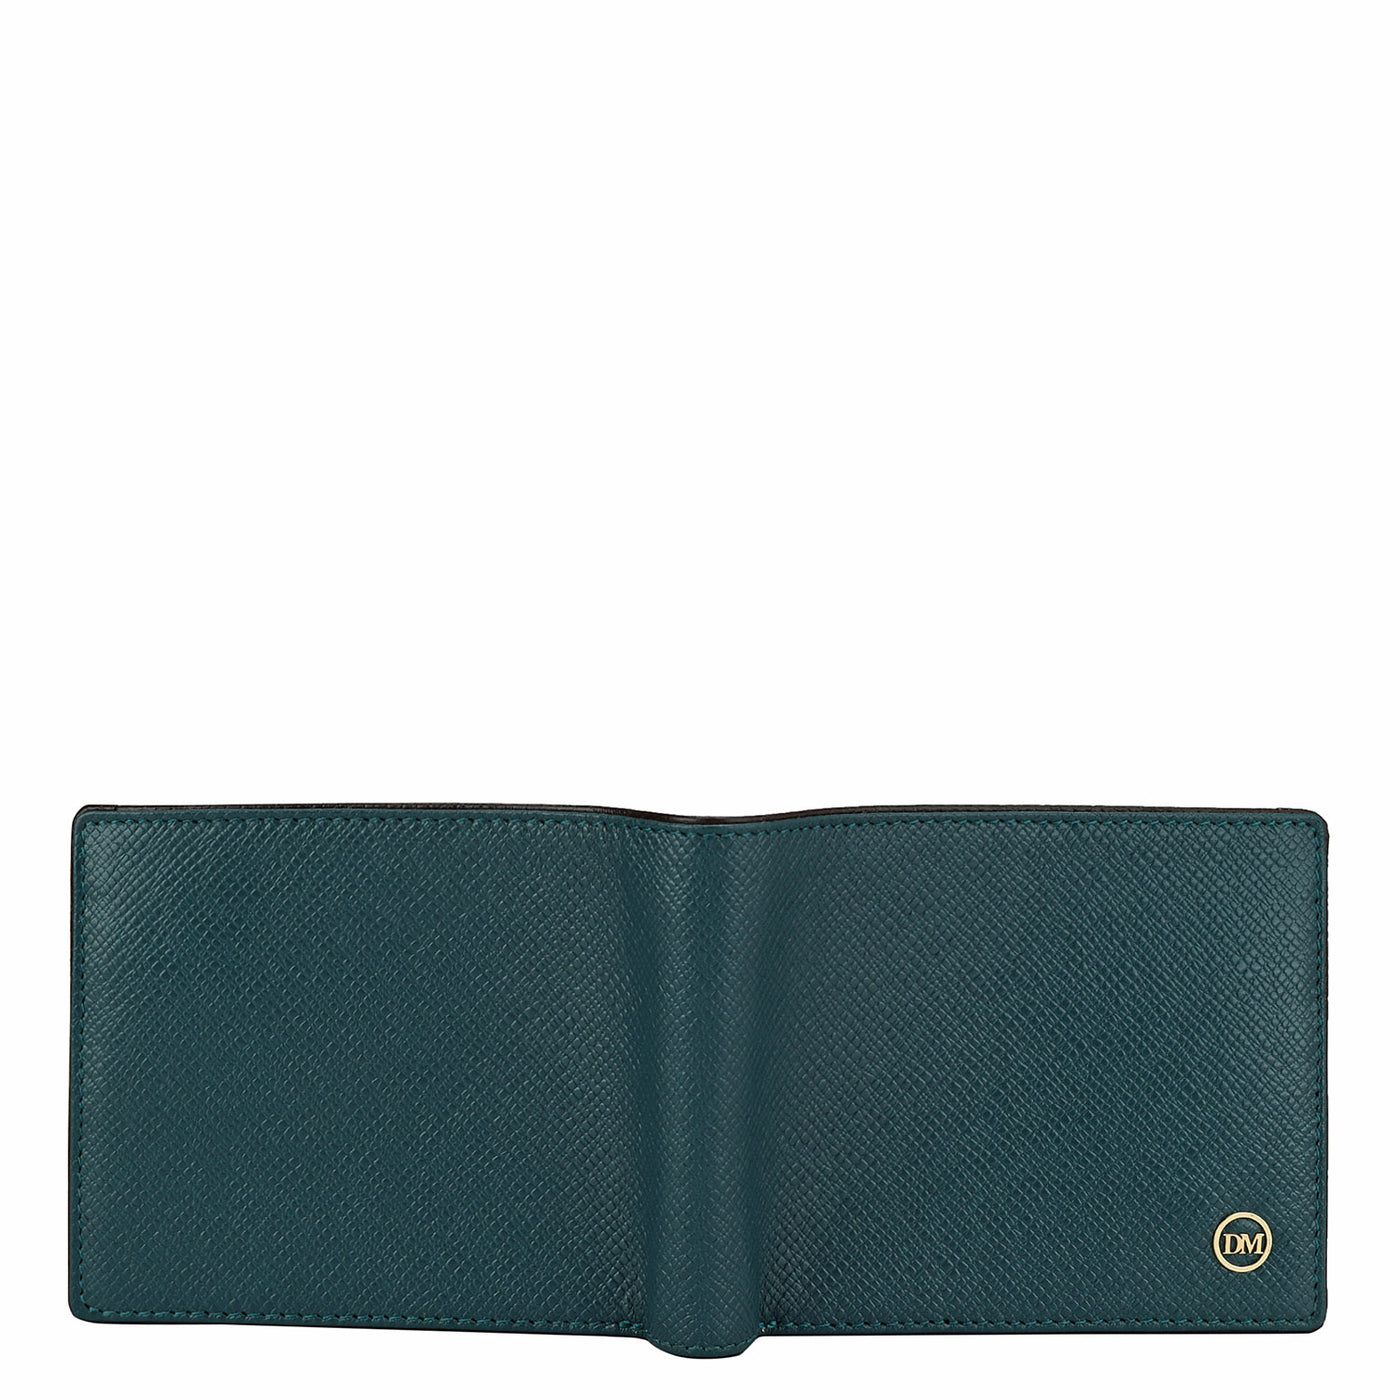 Franzy Leather Mens Wallet - Octane